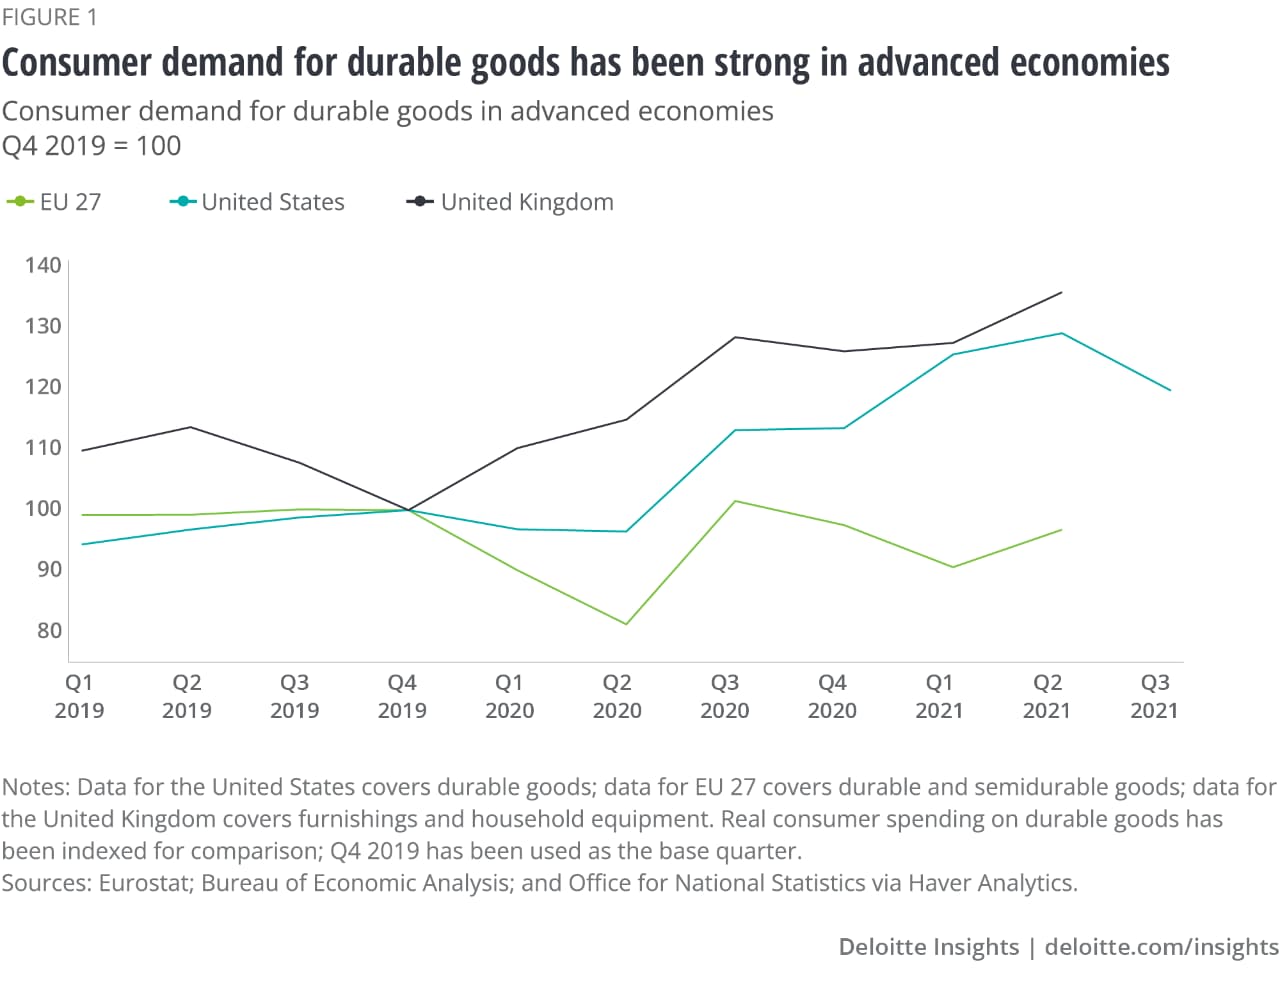 Figure 1: Consumer demand for durable goods has been strong in advanced economies